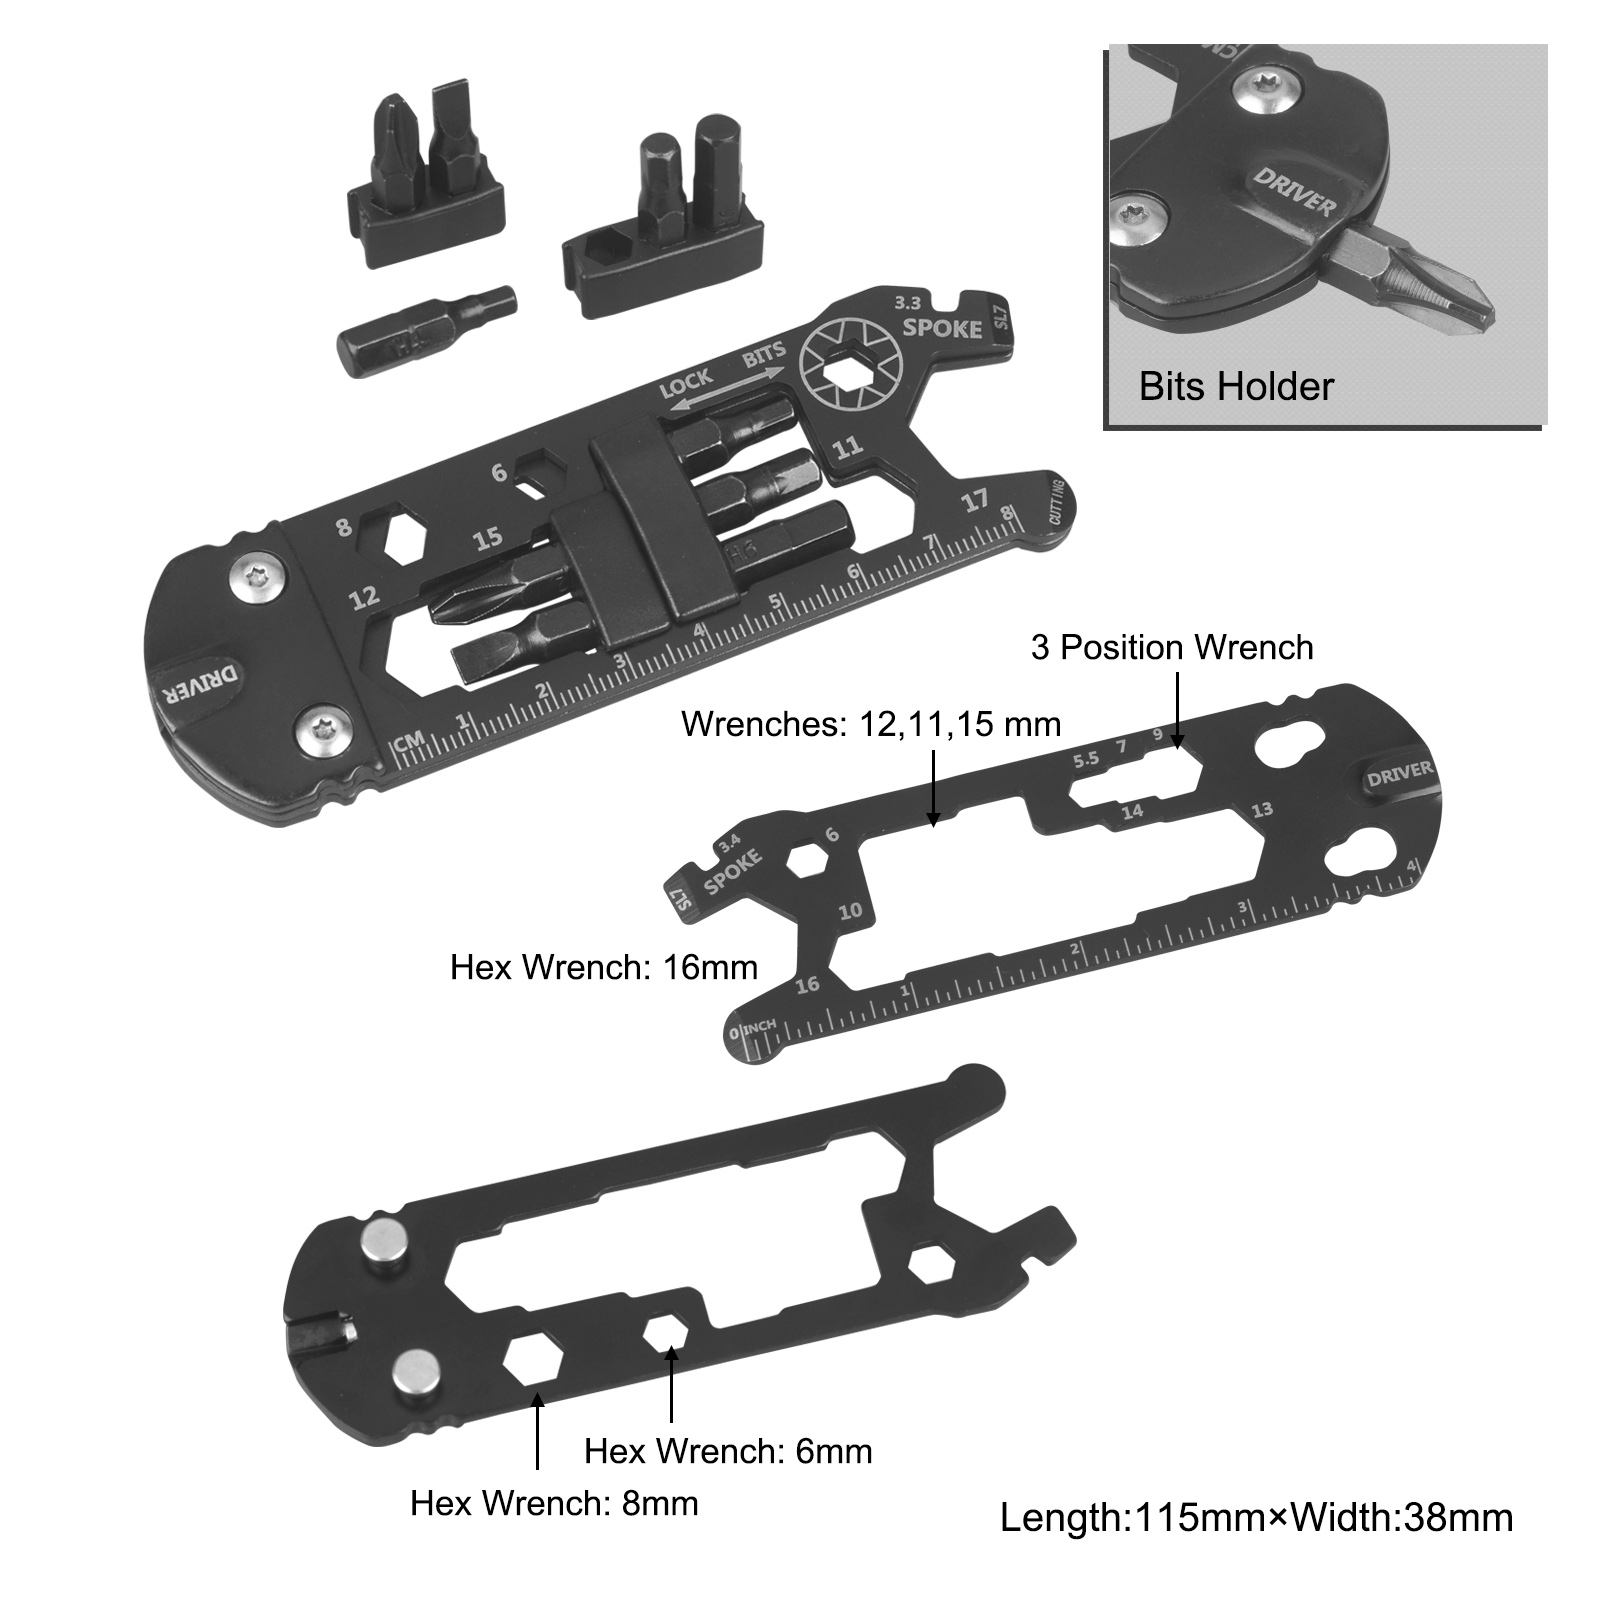 #6314 Multi Function Hex Wrench with Bits